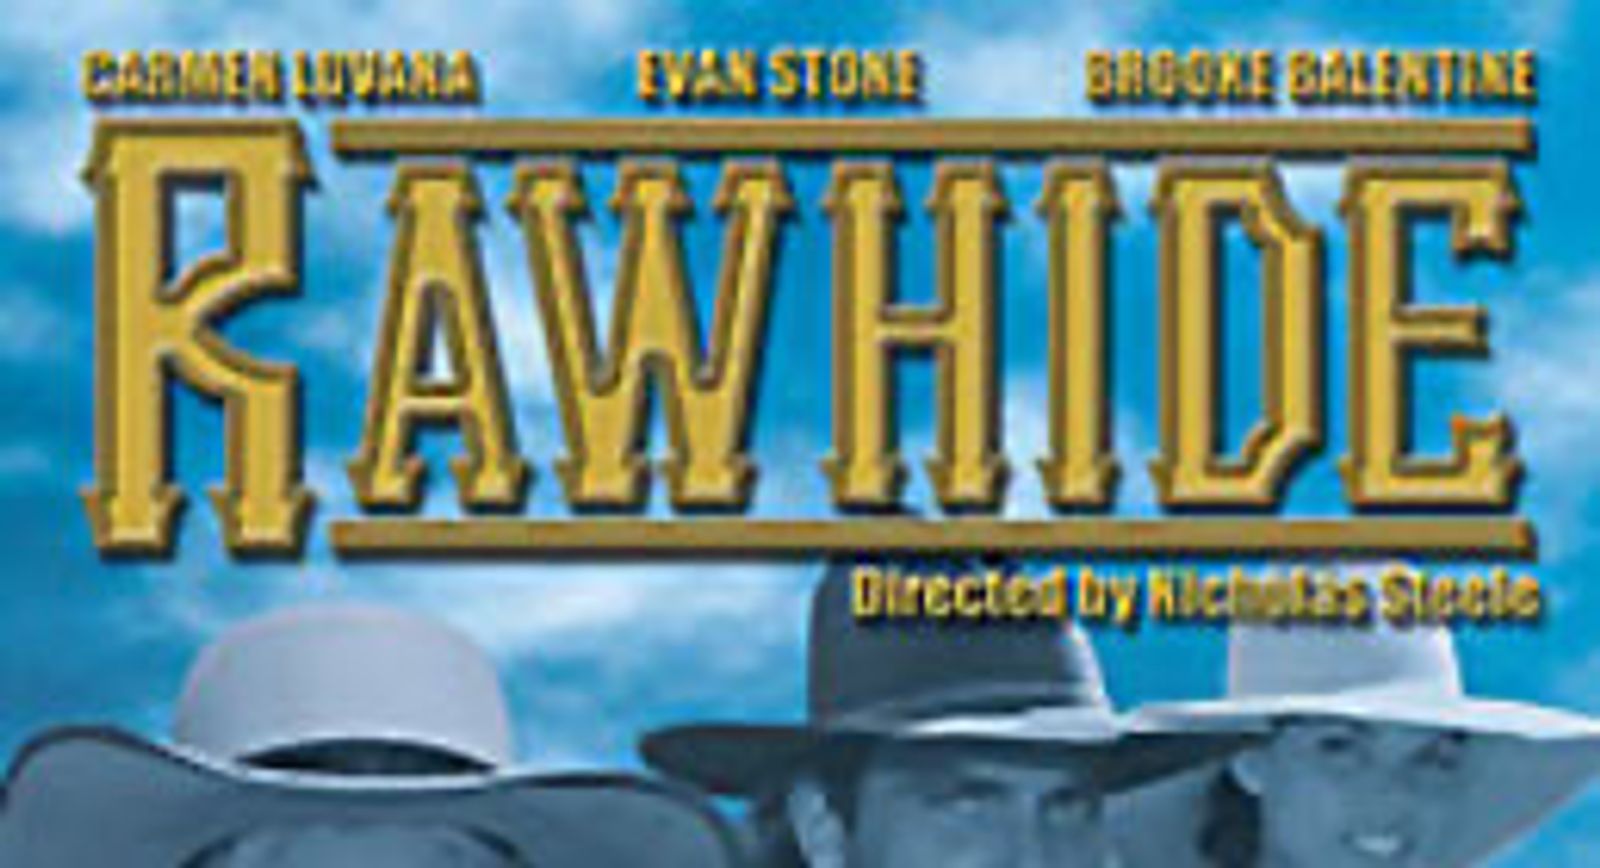 Raw Hide Trailer Available For Download: Adam & Eve